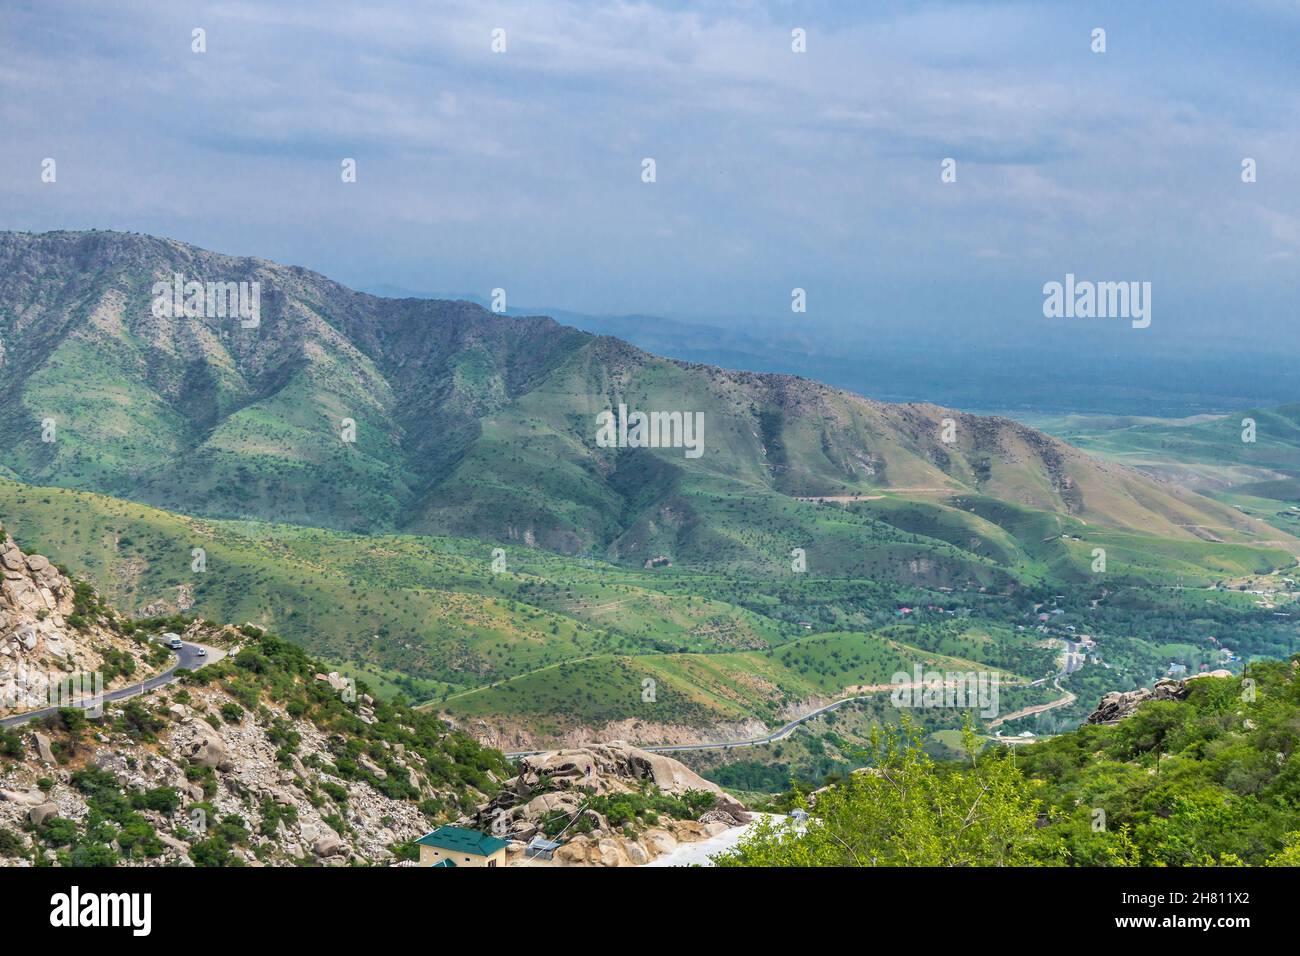 Panorama of Zarafshan mountains in eastern Uzbekistan. Mountains are part of Gissar ridge. Winding road and small village are visible Stock Photo